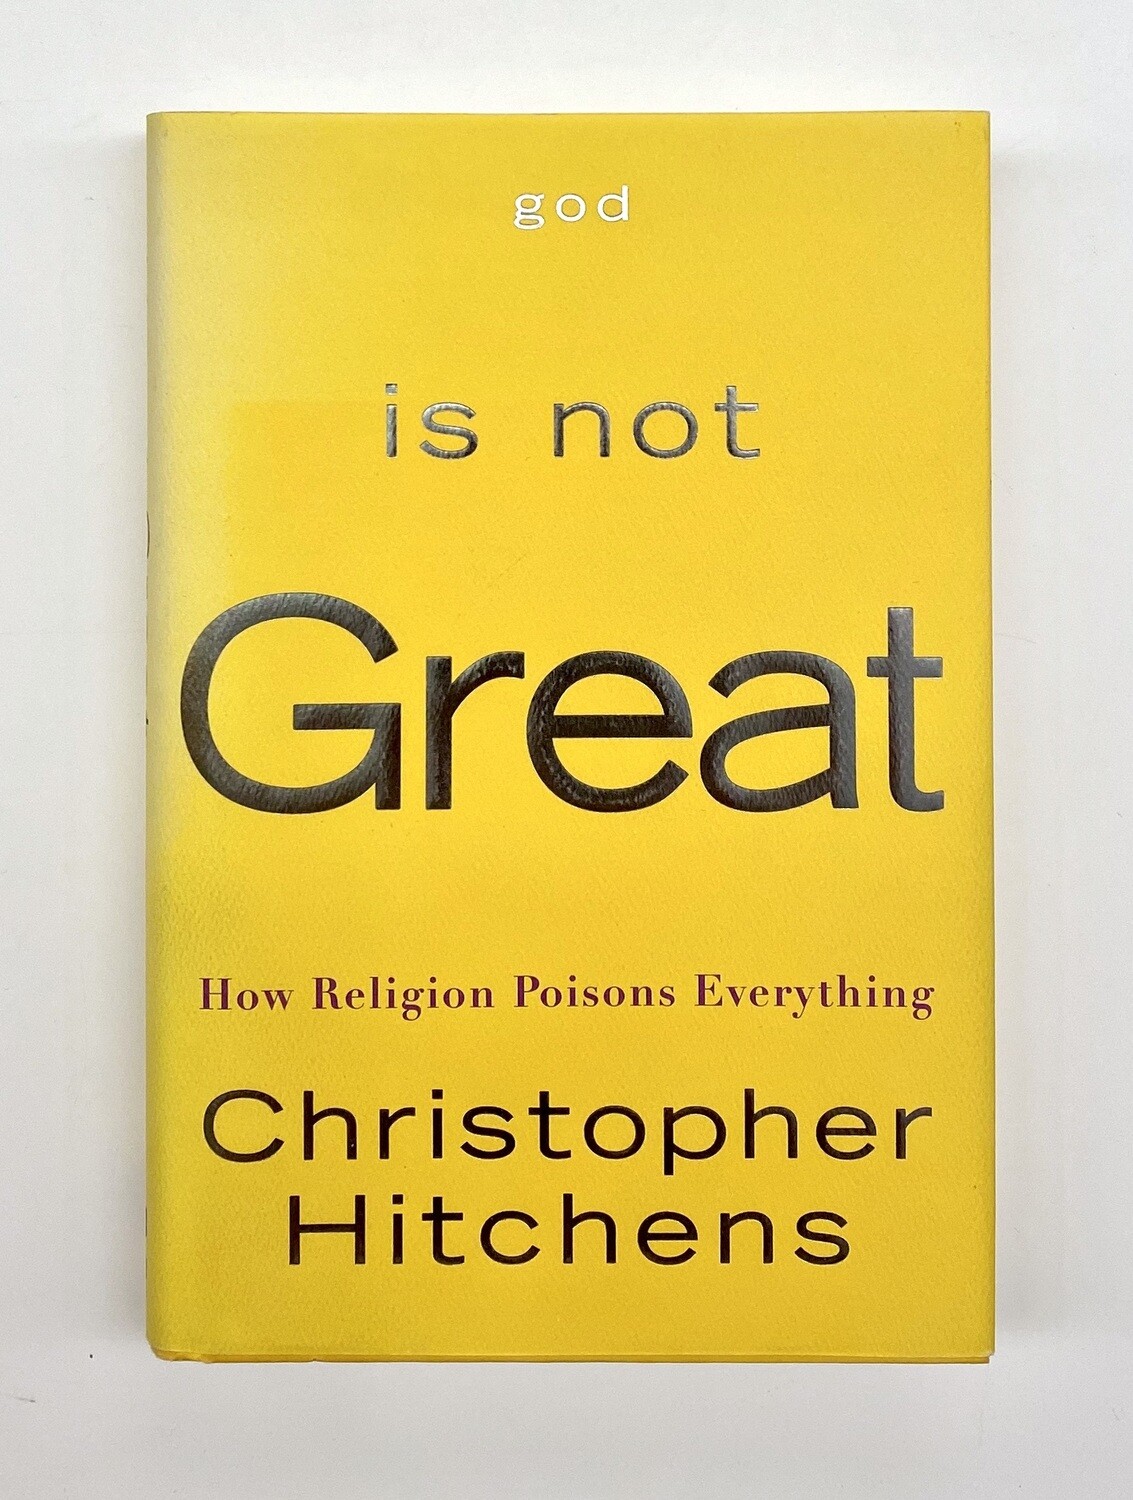 USED - God is Not Great: How Religion Poisons Everything, Hitchens, Christopher 